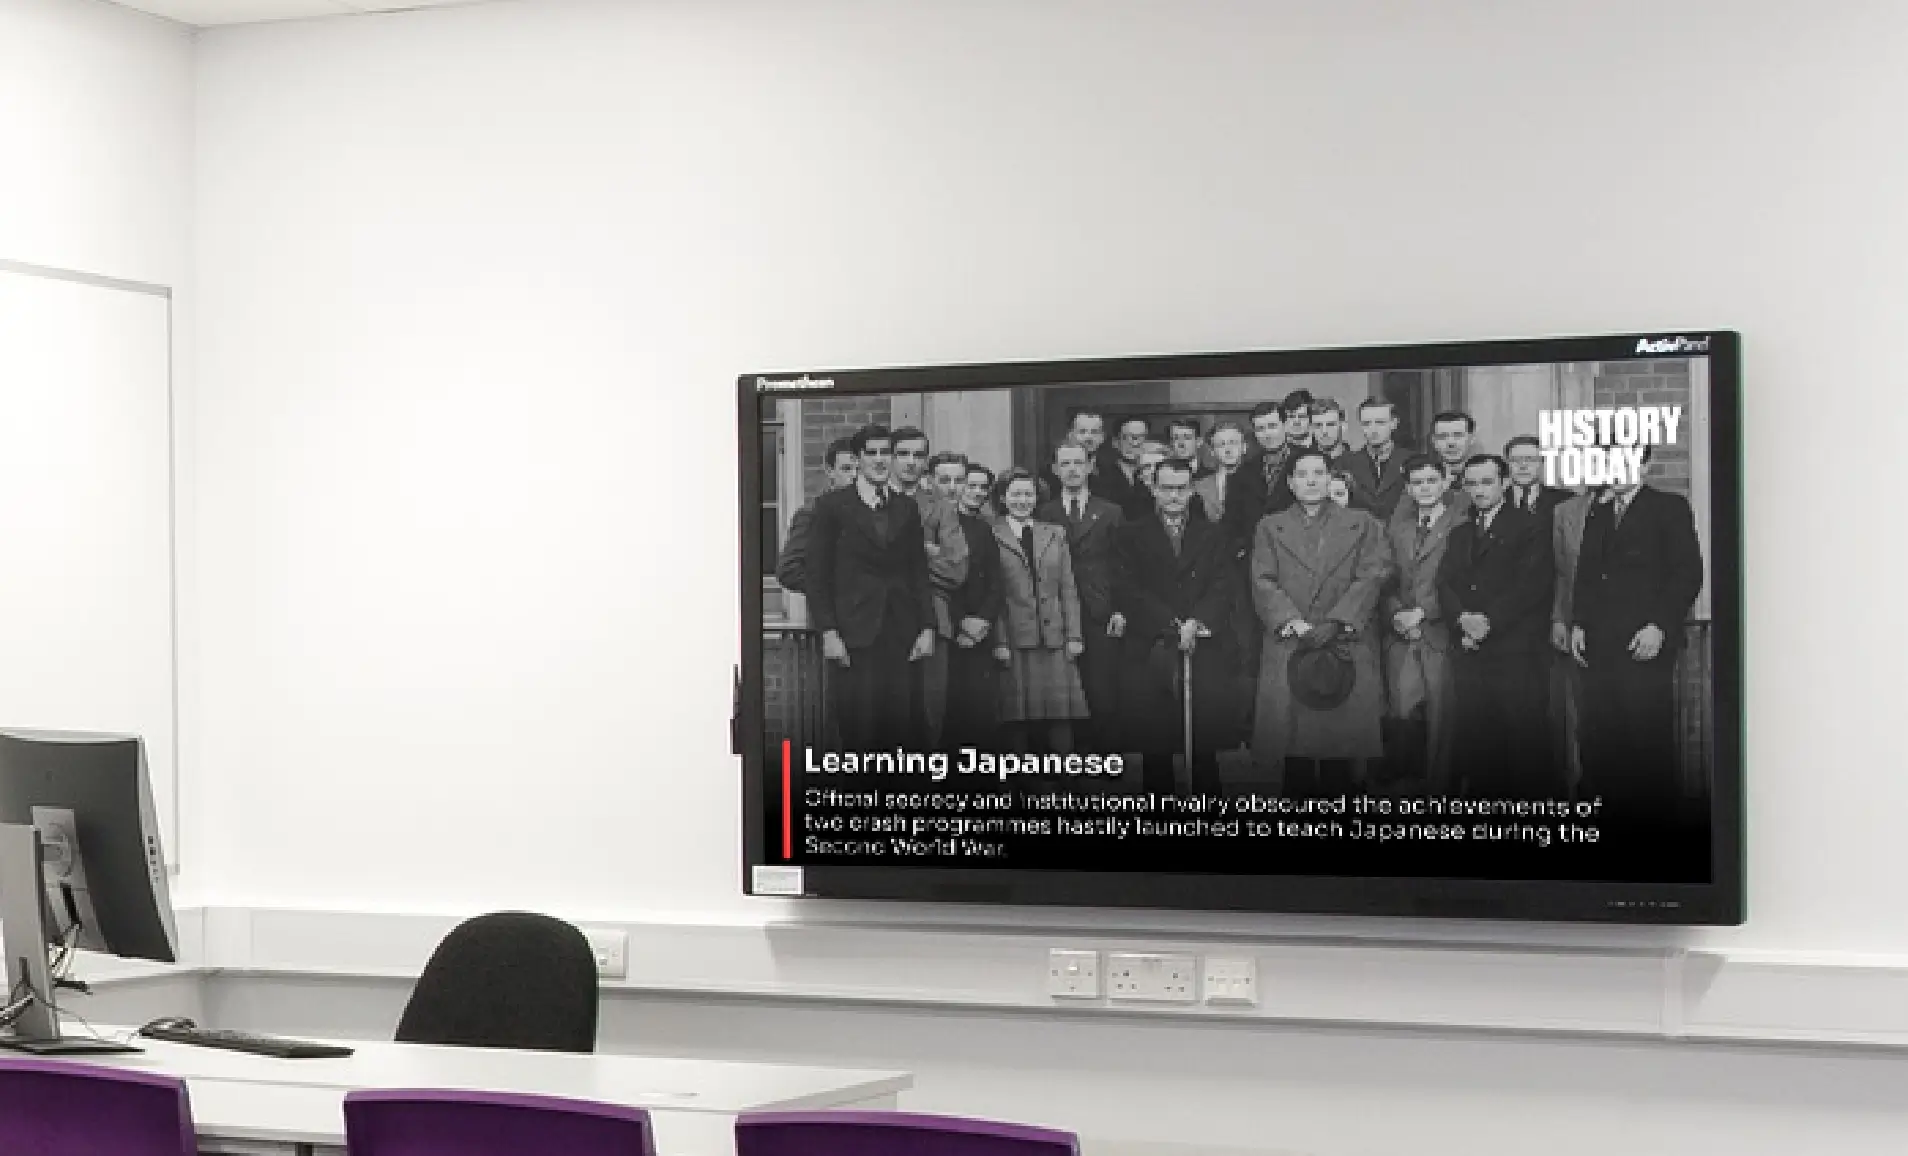 classroom digital signage displaying news feeds from History Today News digital signage app